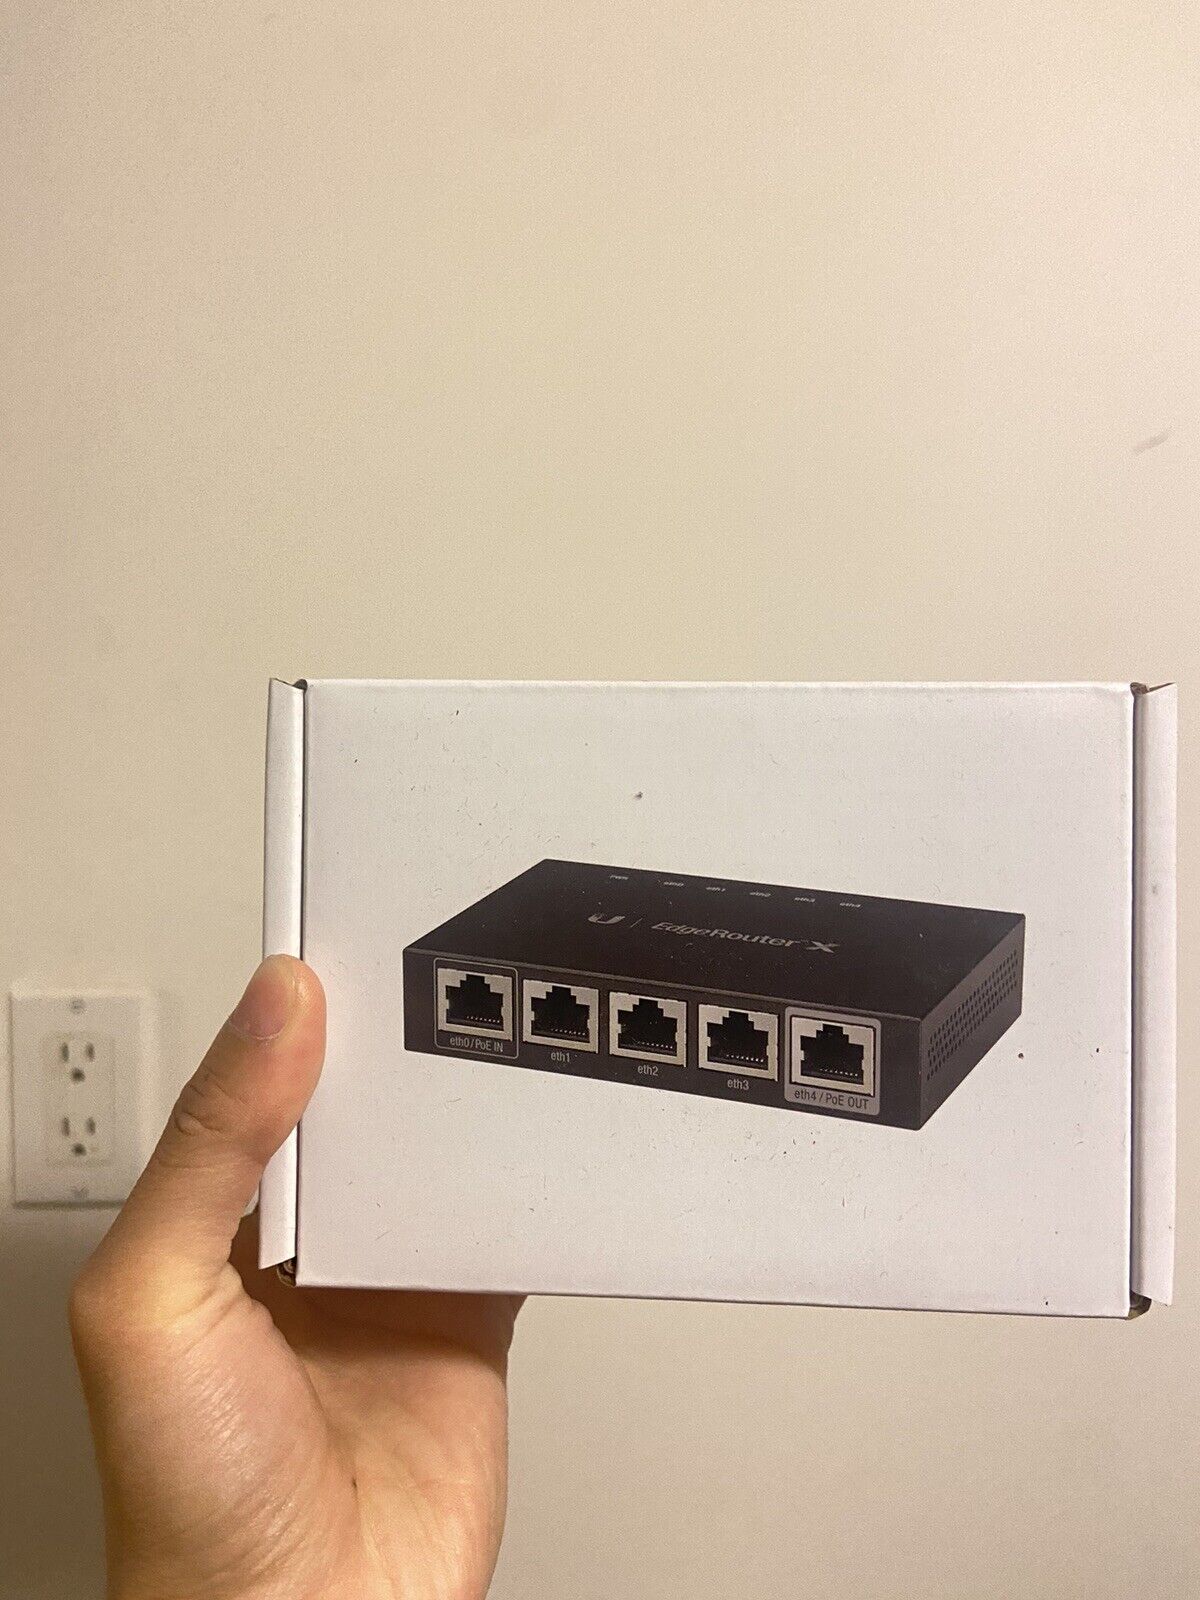 New In Box - Ubiquiti Networks EdgeRouter X (ER-X) 5-Port Gigabit Wired Router